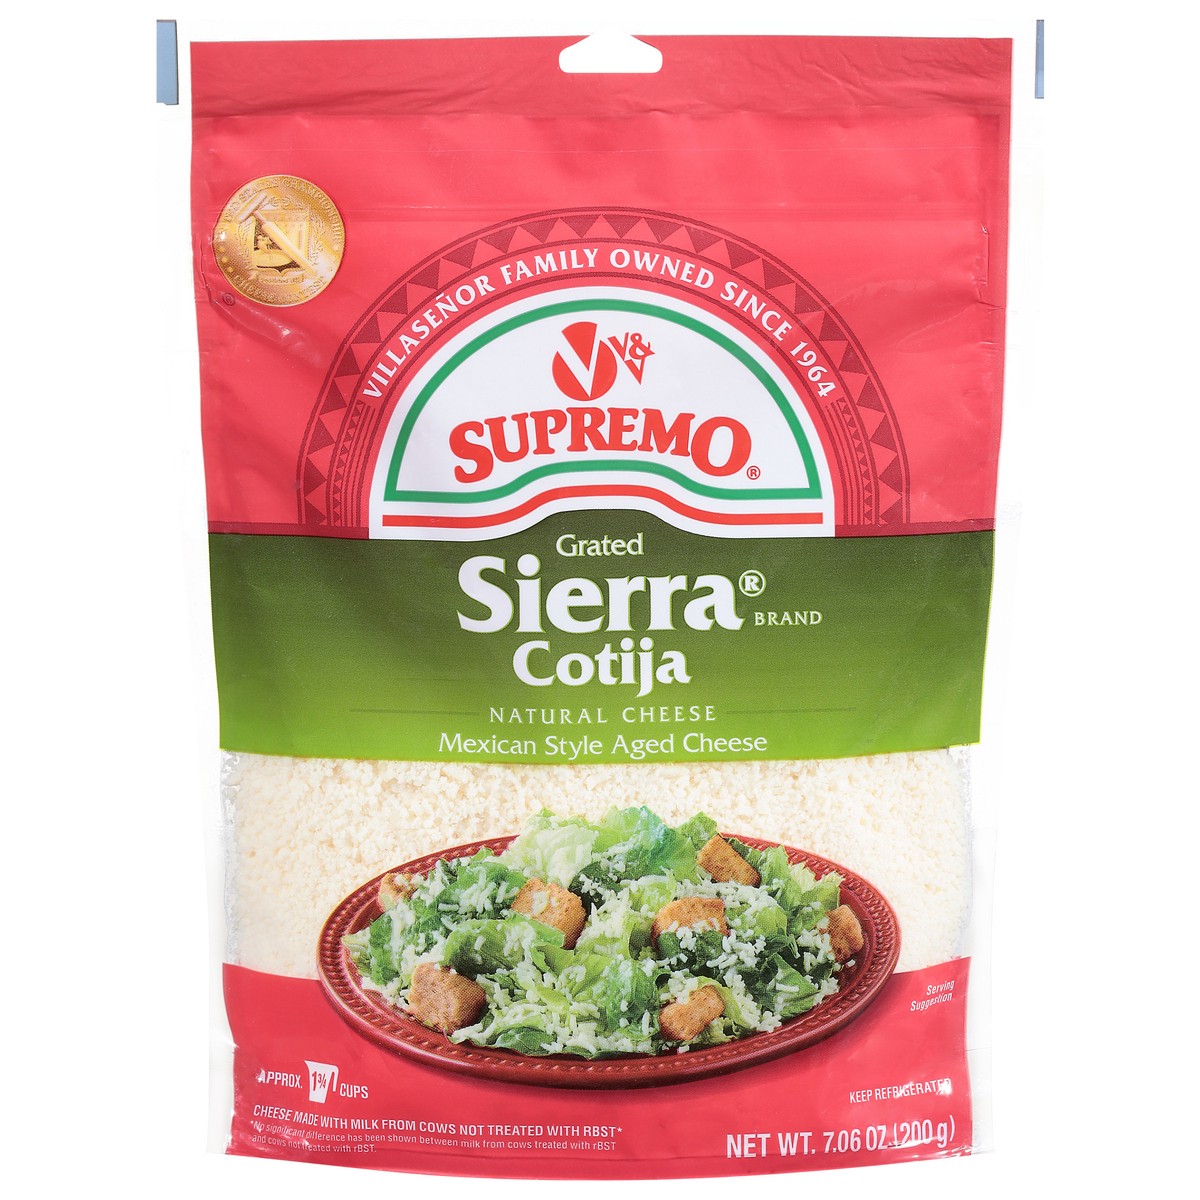 slide 7 of 14, Supremo Natural Sierra Brand Cotija Grated Cheese 7.06 oz, 1 ct